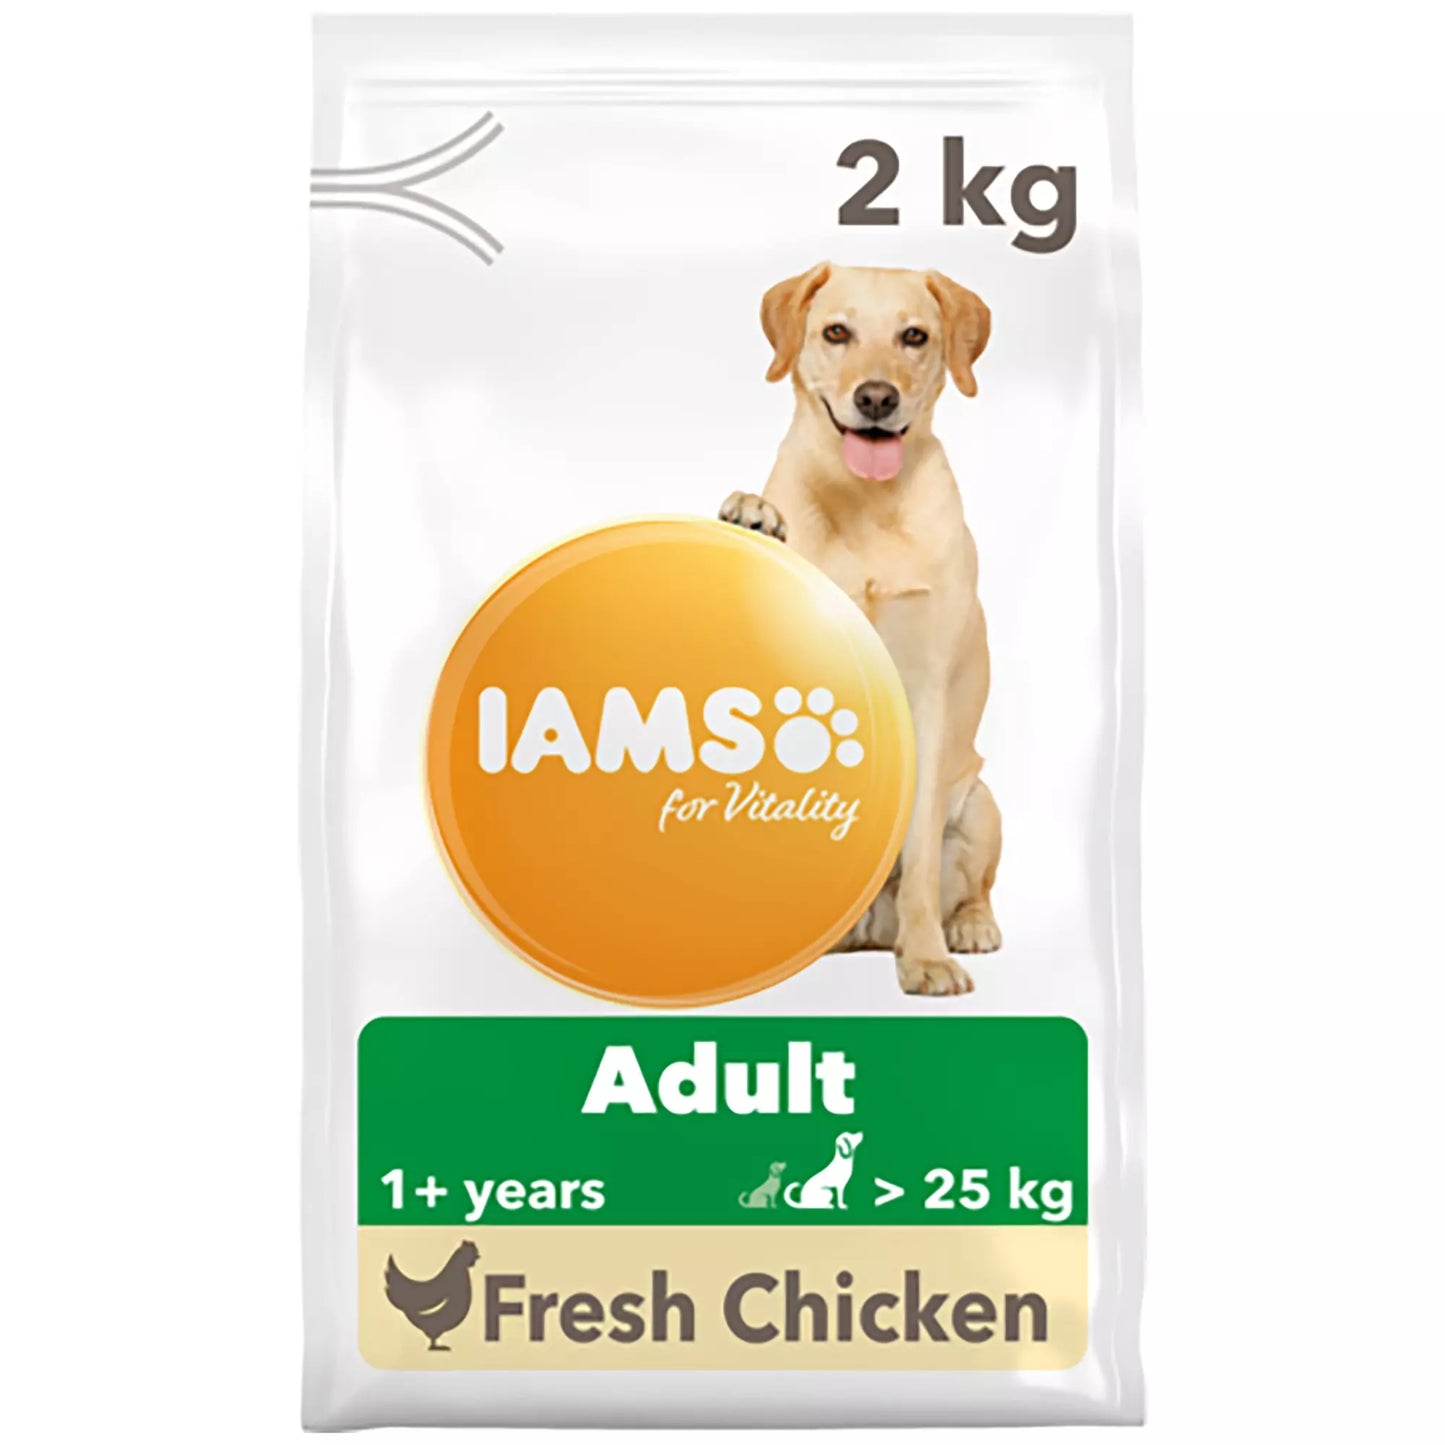 IAMS for Vitality Adult Large Breed (Fresh Chicken)